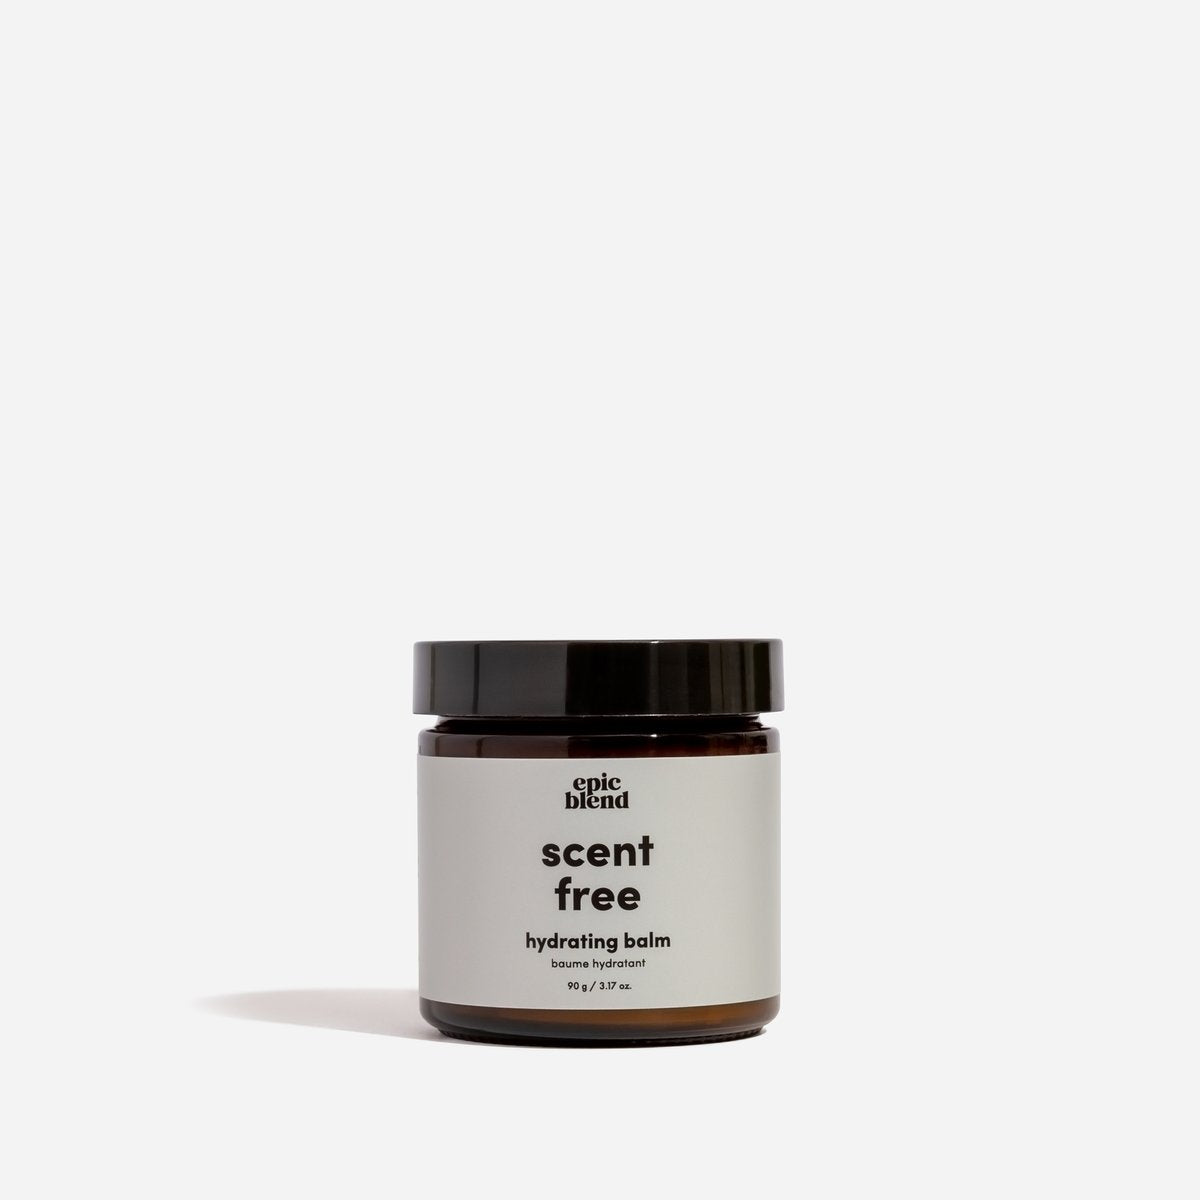 EB - Unscented Dry Skin Hydrating Balm